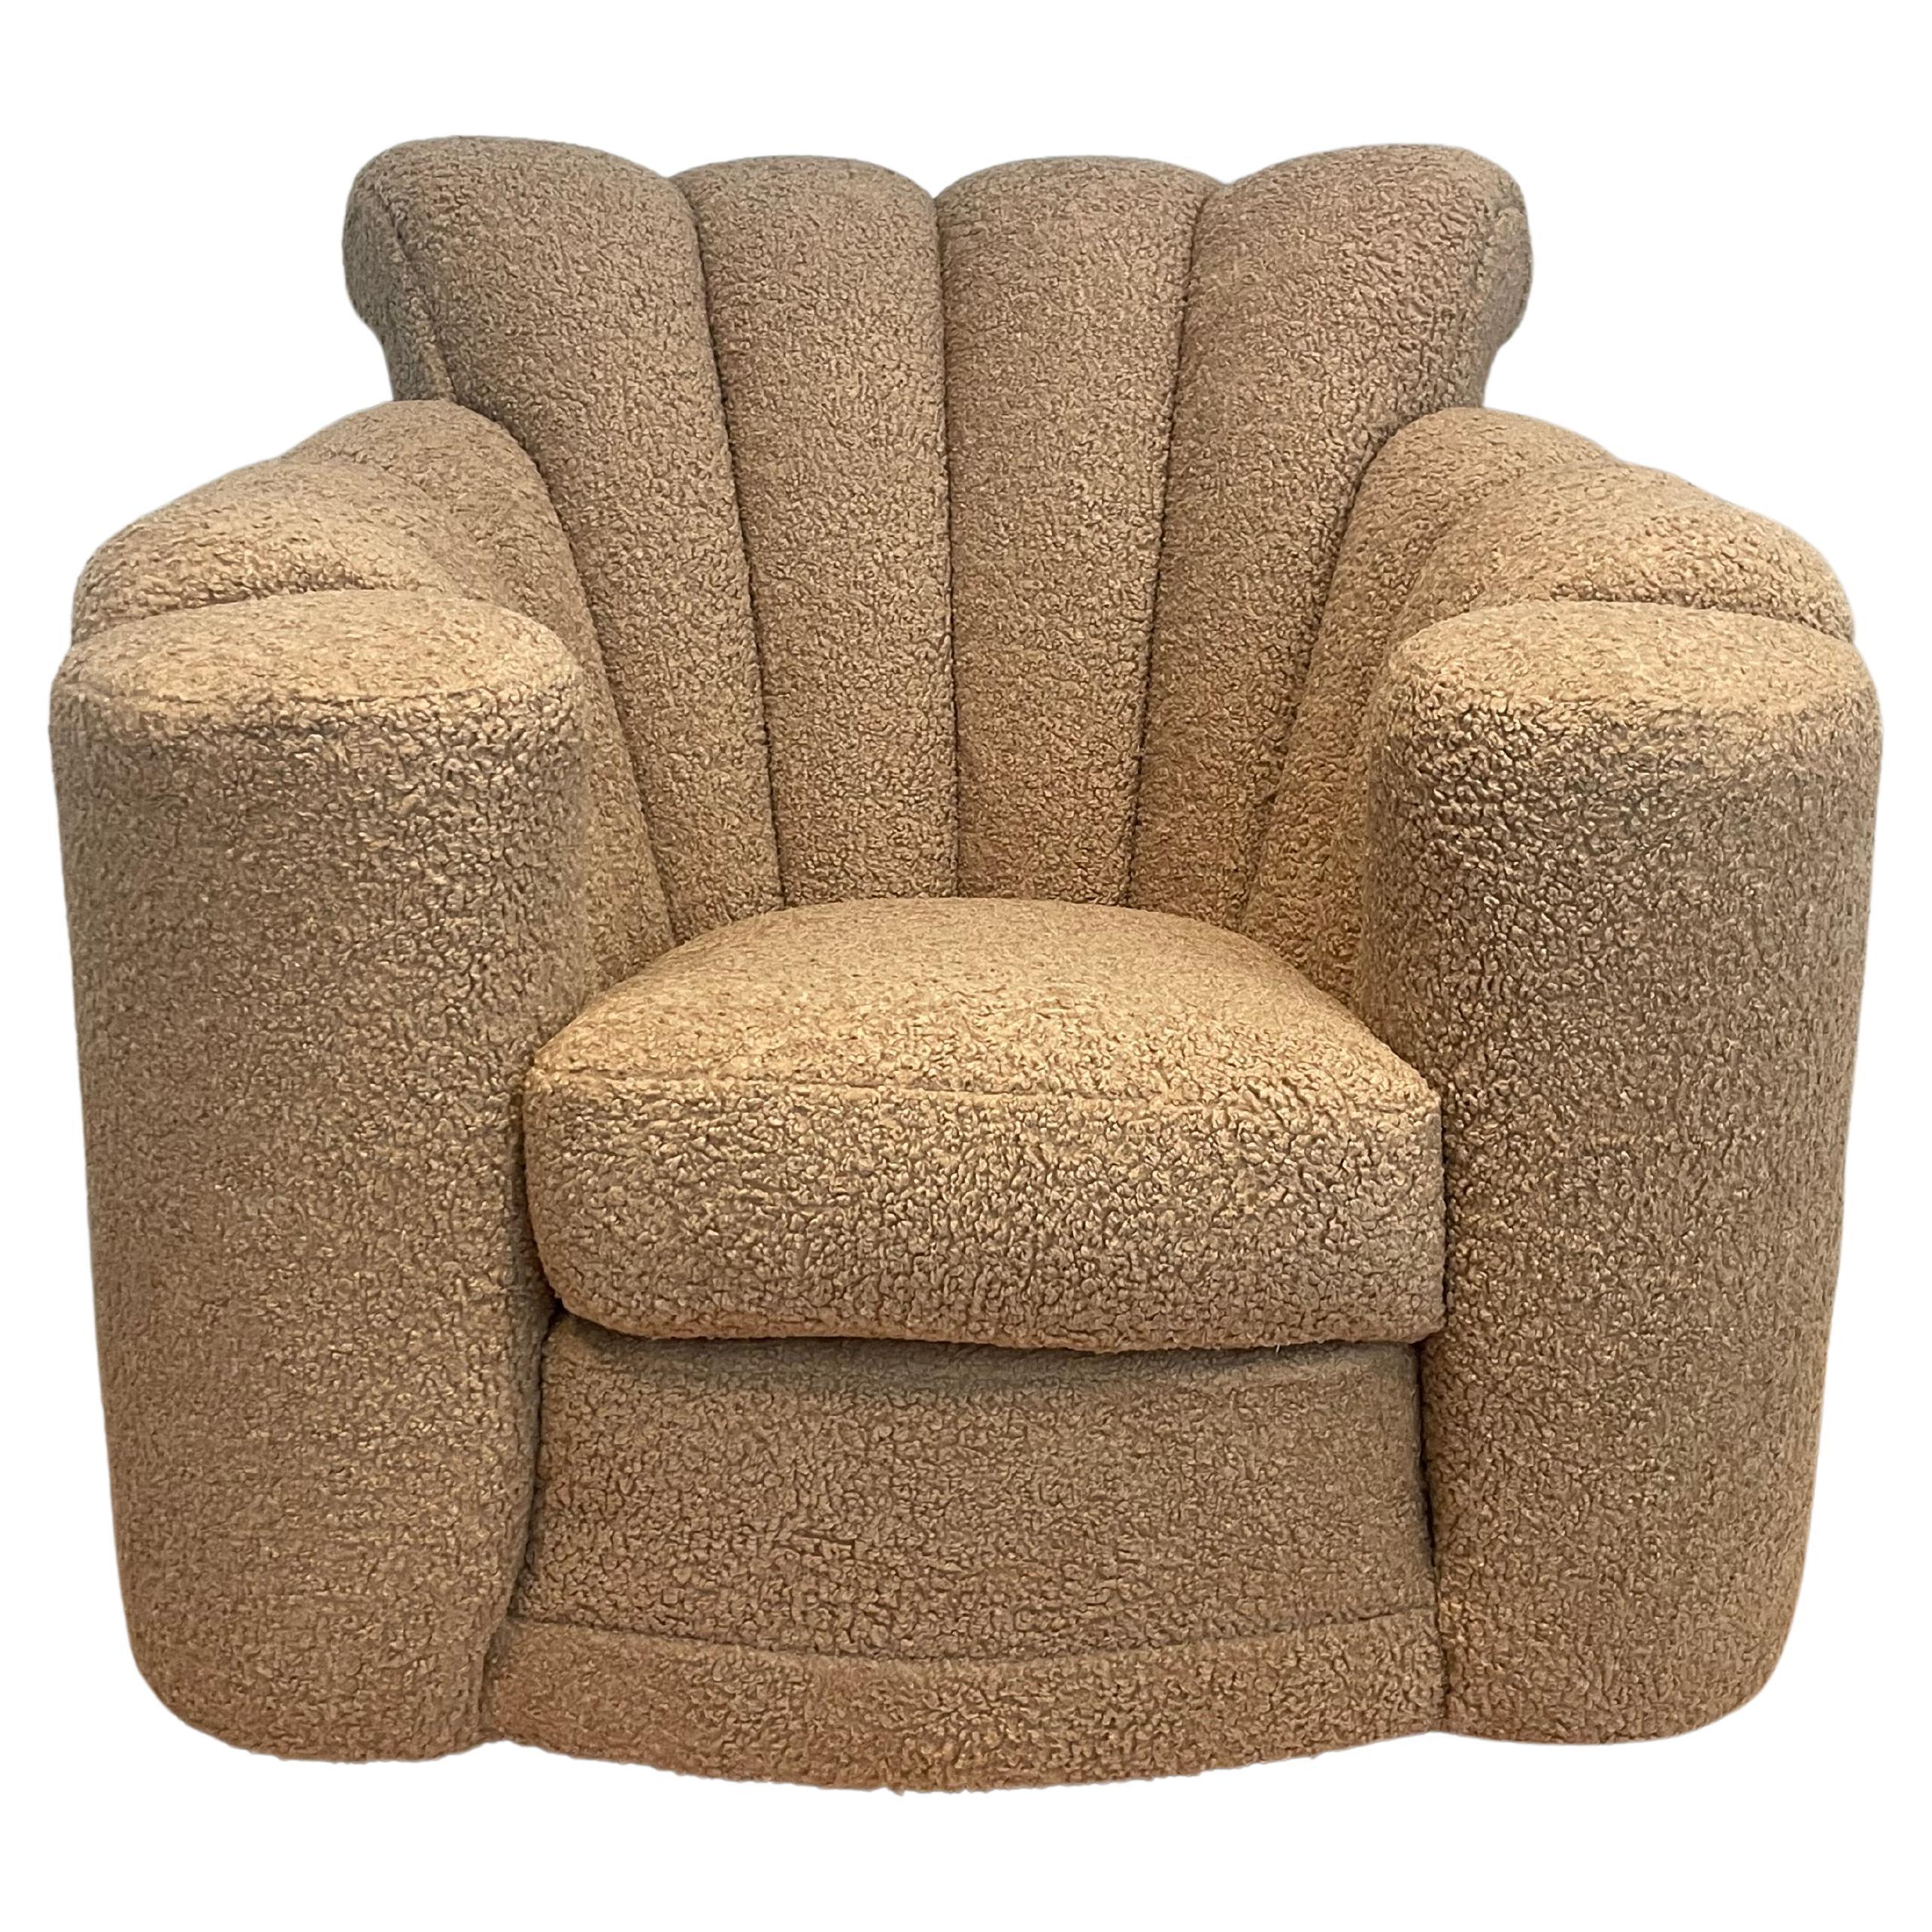 Monumental Oversize 1920 Deco Club Chair in Toffee-toned Boucle For Sale